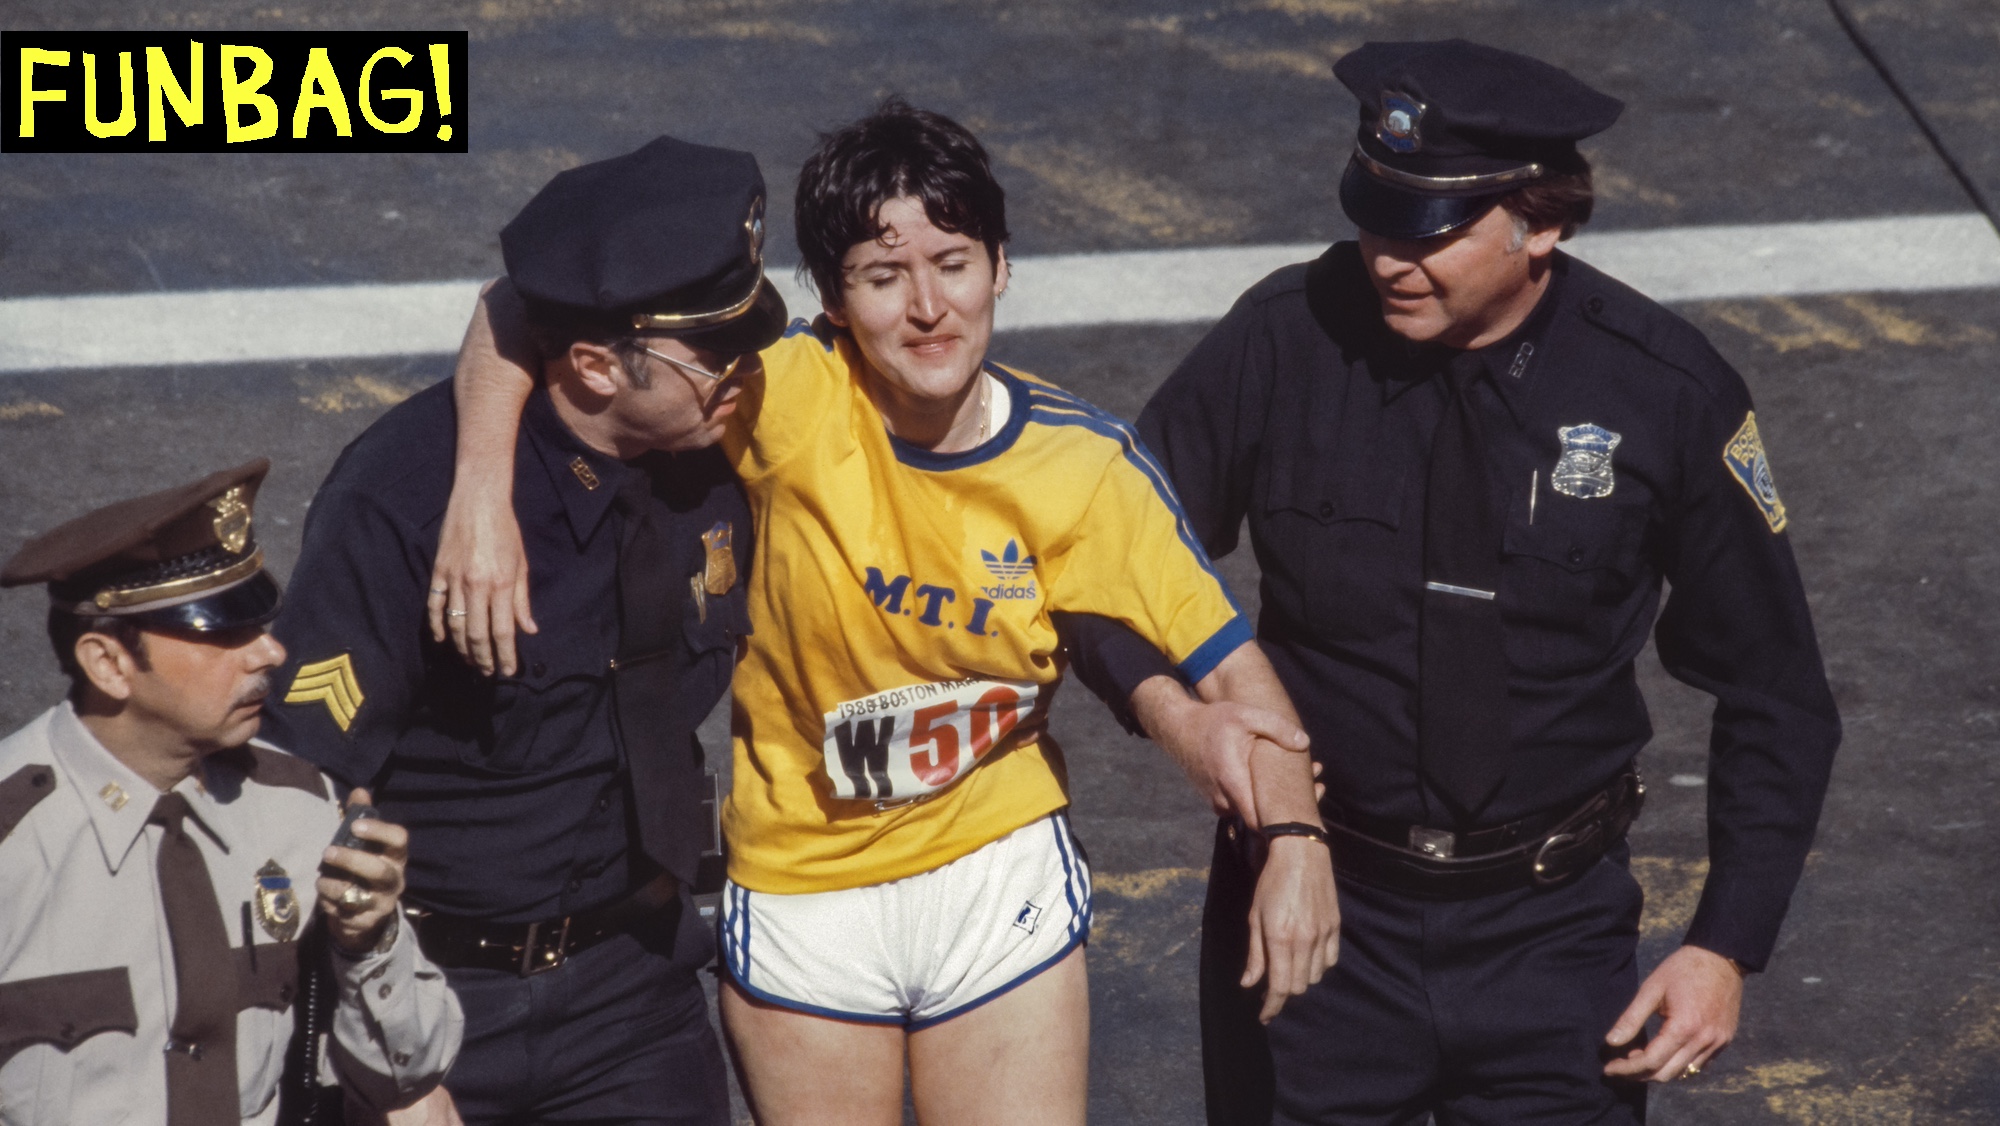 BOSTON - APRIL 21: Rosie Ruiz #W50 is supported by Boston police officers moments after crossing the finish line as the apparent women's race winner of the 84th Boston Marathon held on April 21, 1980 in Boston, Massachusetts. Ruiz was later stripped of her race title after it was determined she had not run the entire race. (Photo by David Madison/Getty Images) *** Local Caption *** Rosie Ruiz